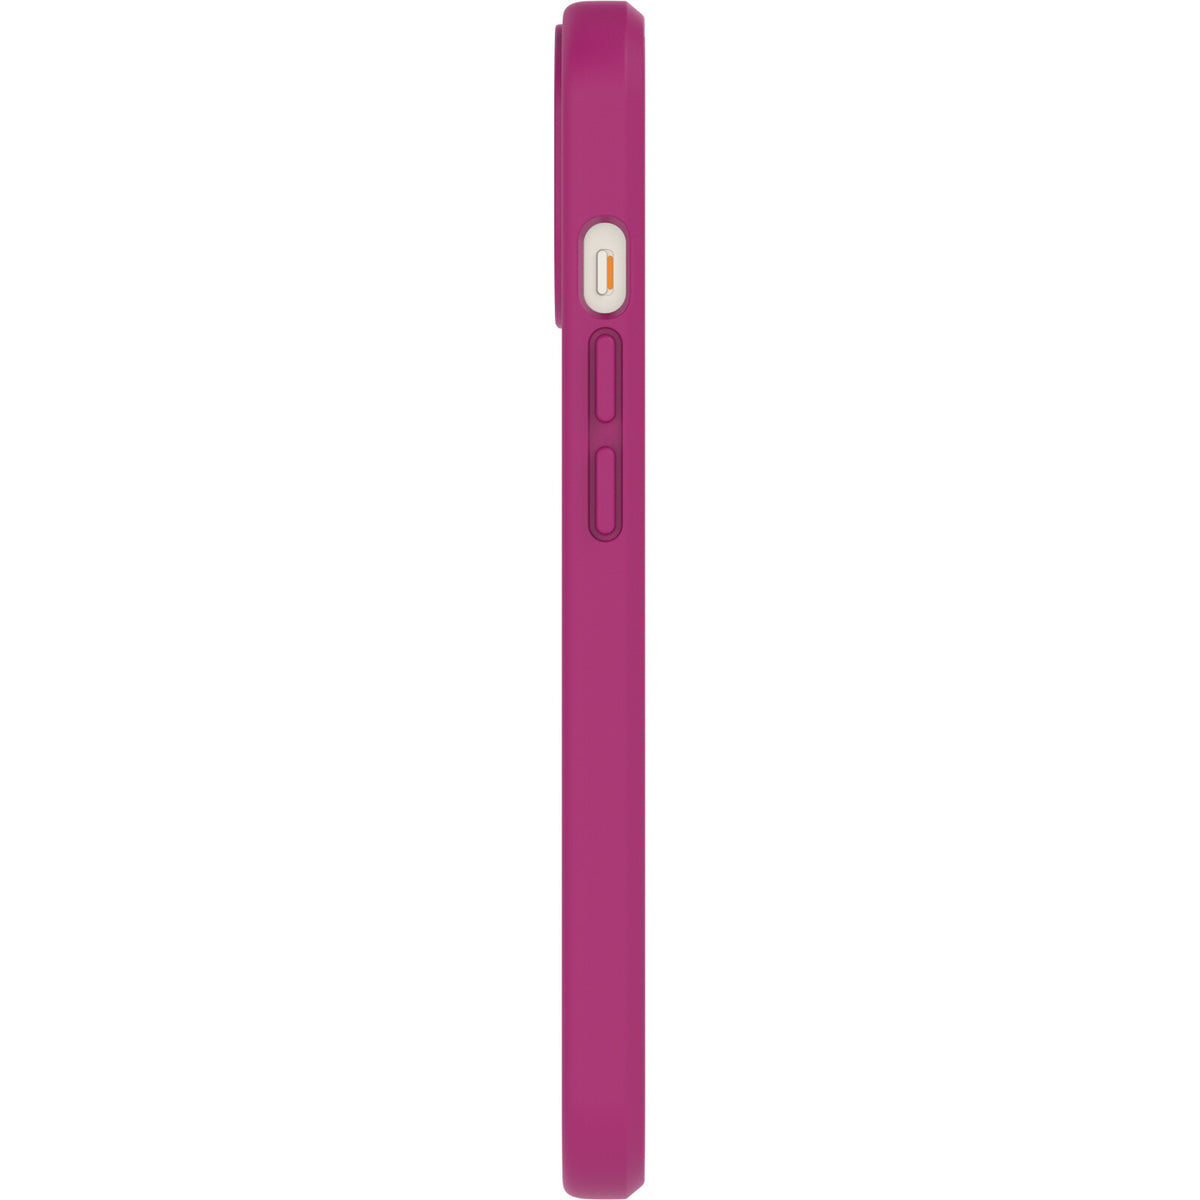 OtterBox React Case for iPhone 13 mini / 12 mini in Party Pink - No Packaging